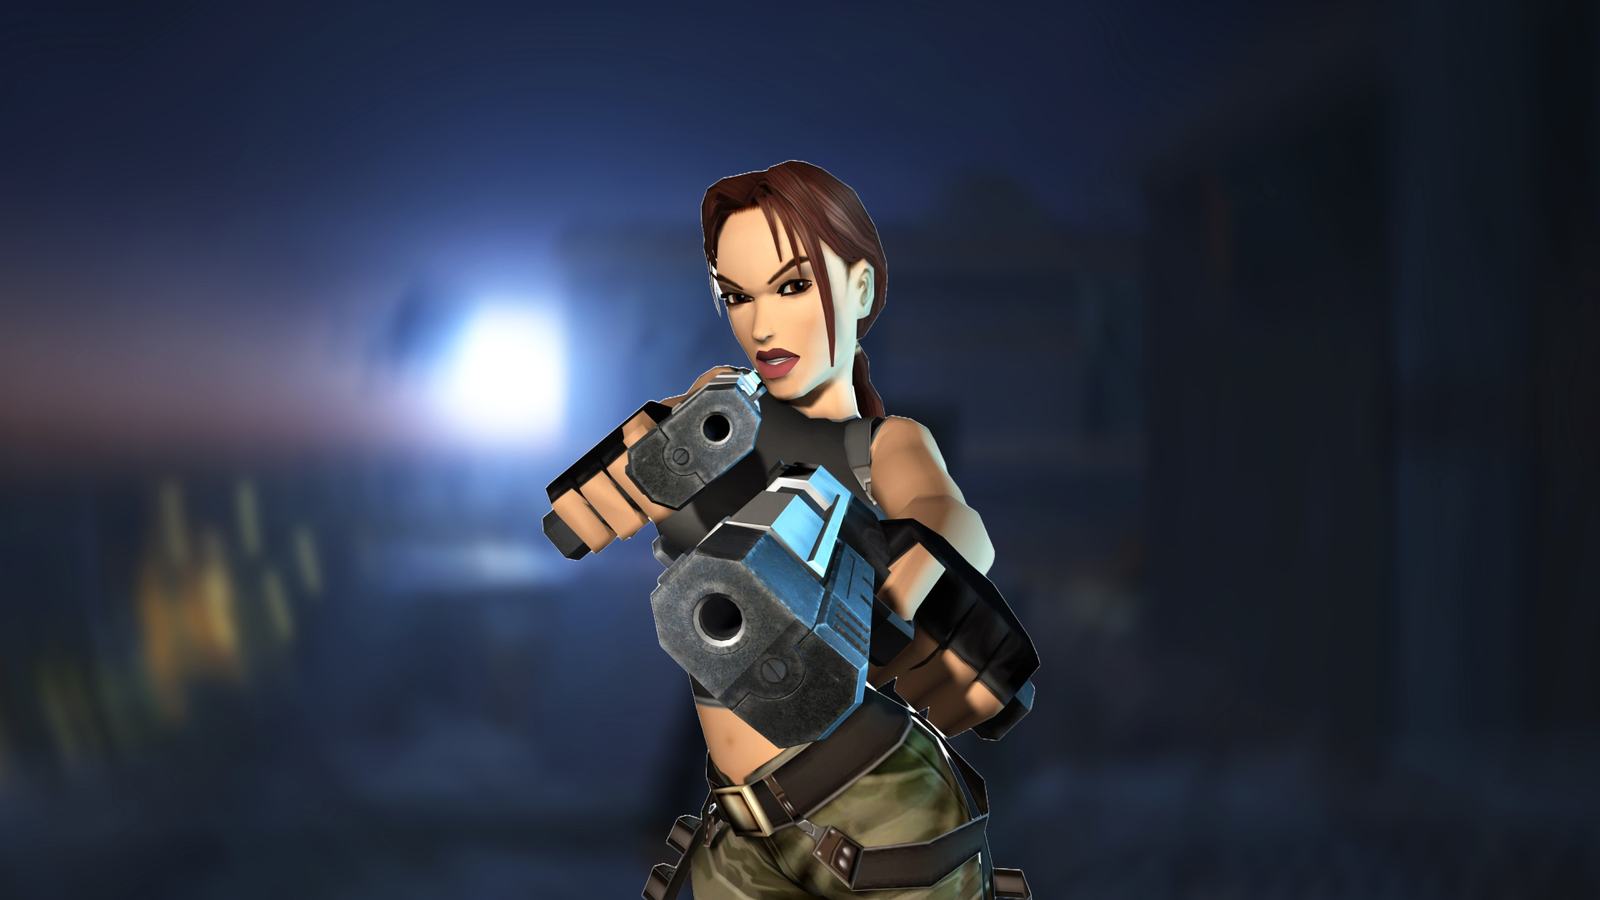 20 Years in, Lara Croft Continues Reign as 'Queen of Gaming' With